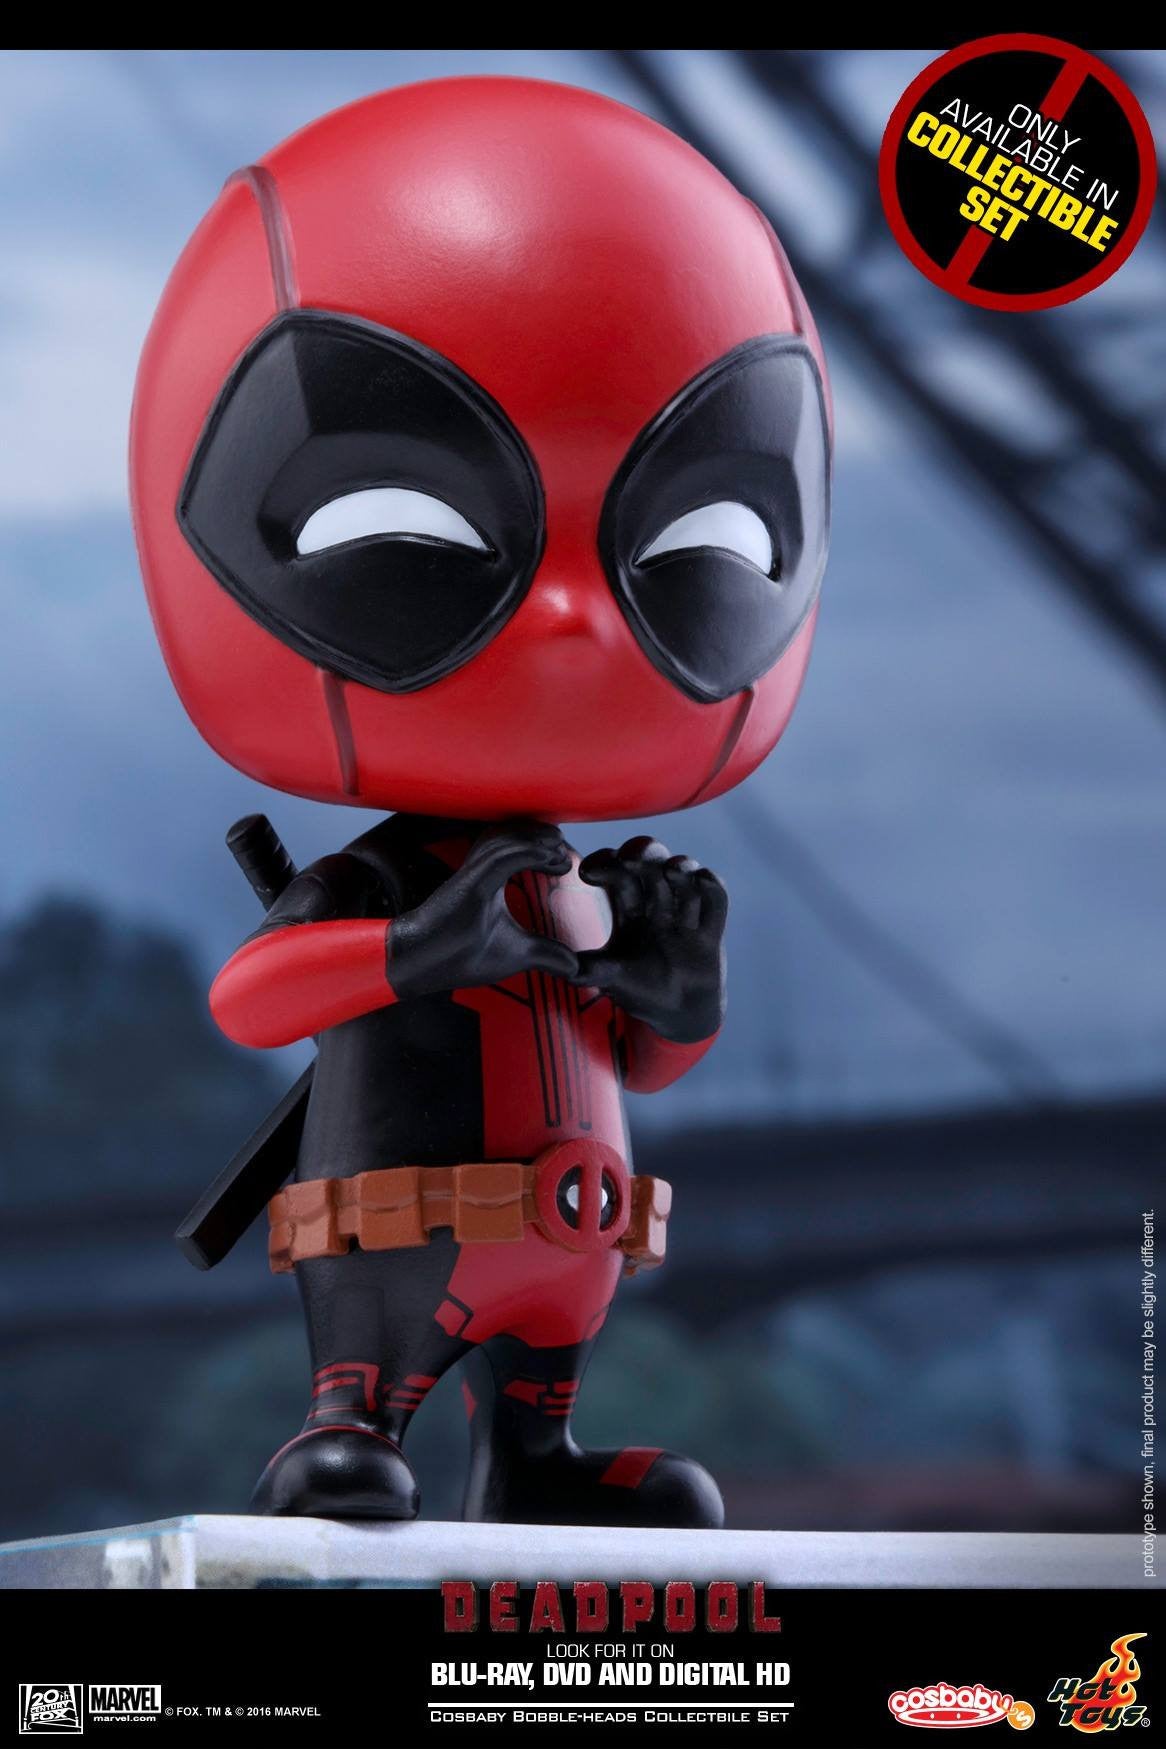 Hot Toys - COSB246 - Deadpool (Surprised, Fighting Pose, Heart Gesturing Versions) Cosbaby Bobble-Head Set - Marvelous Toys - 4